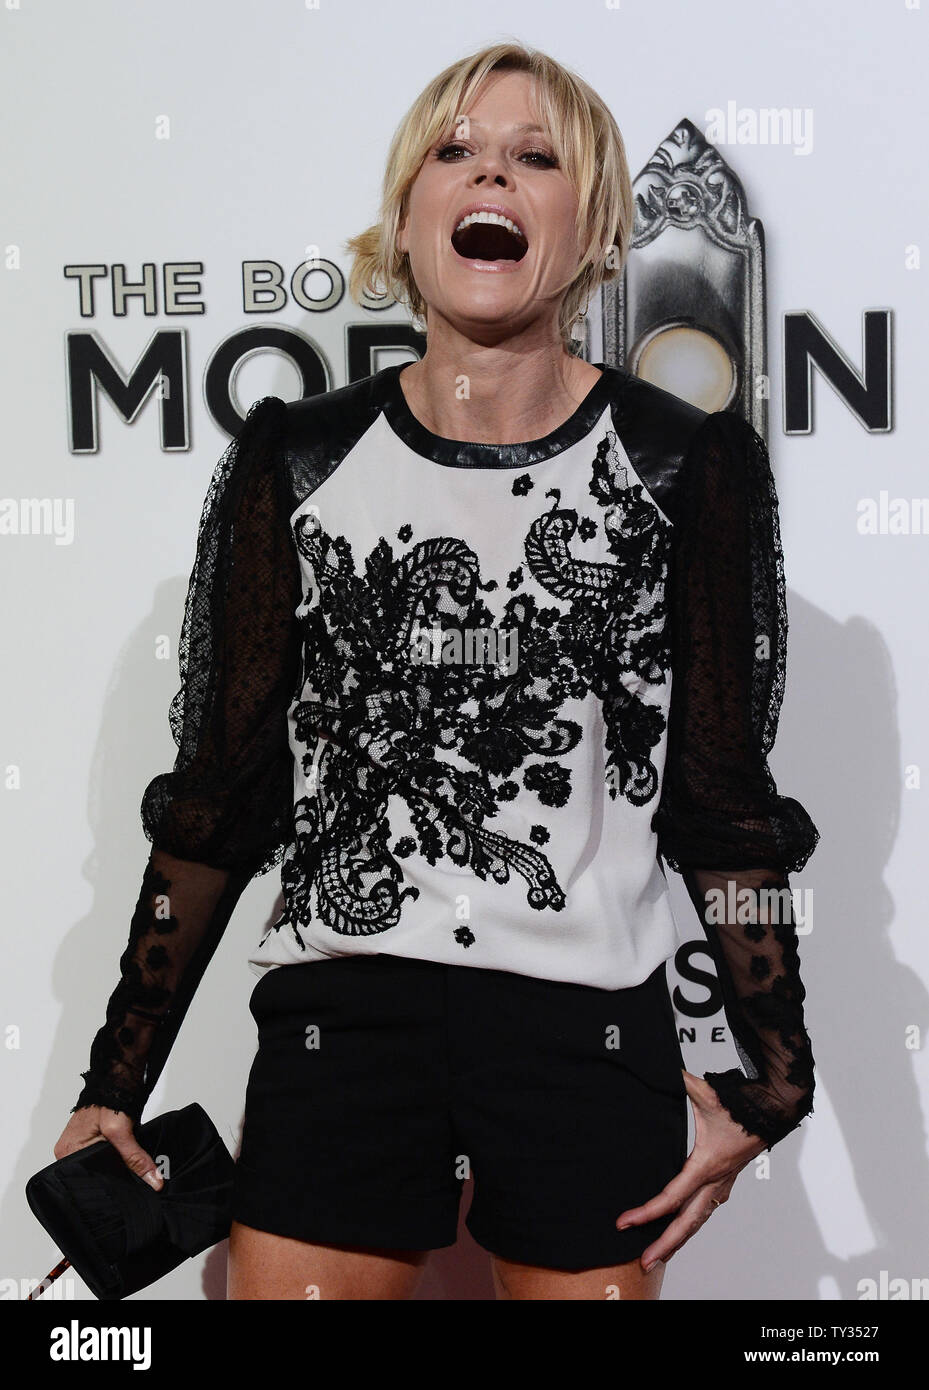 Actress Julie Bowen attends the premiere of 'The Book of Mormon' at the Pantages Theatre in the Hollywood section of Los Angeles on September 12, 2012.  UPI/Jim Ruymen Stock Photo